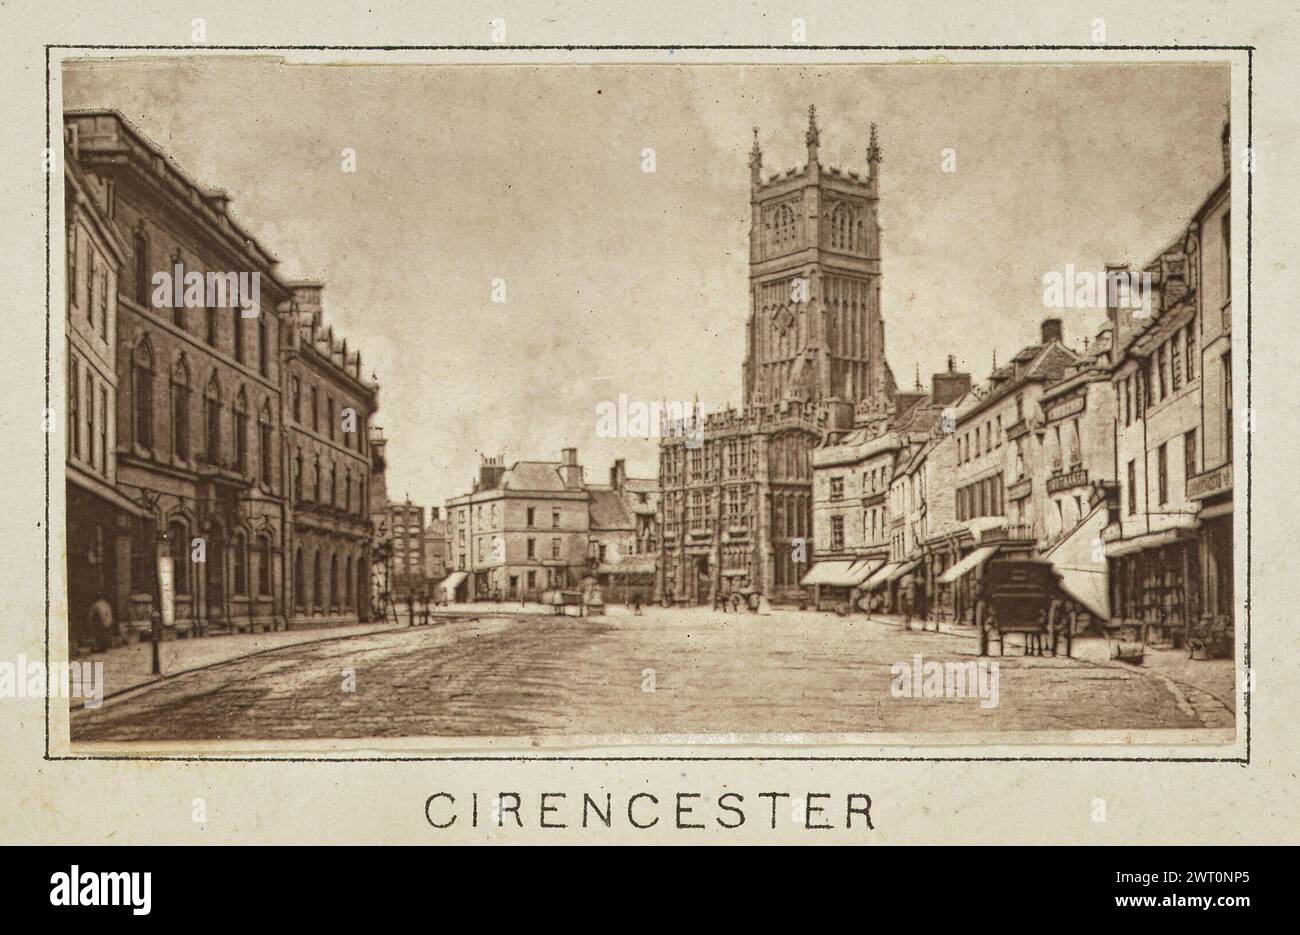 Cirencester. Henry W. Taunt, photographer (British, 1842 - 1922) about 1886 One of three tipped-in photographs illustrating a printed map of Kemble, Somerford Keynes, and the surrounding area along the River Thames. The photograph shows a view down Market Place looking towards the Church of St. John the Baptist in Cirencester. A horse-drawn carriage stands in the road in front of a row of shops on the right side of the image. Pedestrians are visible across the street and sidewalks. (Recto, mount) lower center, below image, printed in black ink: "CIRENCESTER" Stock Photo